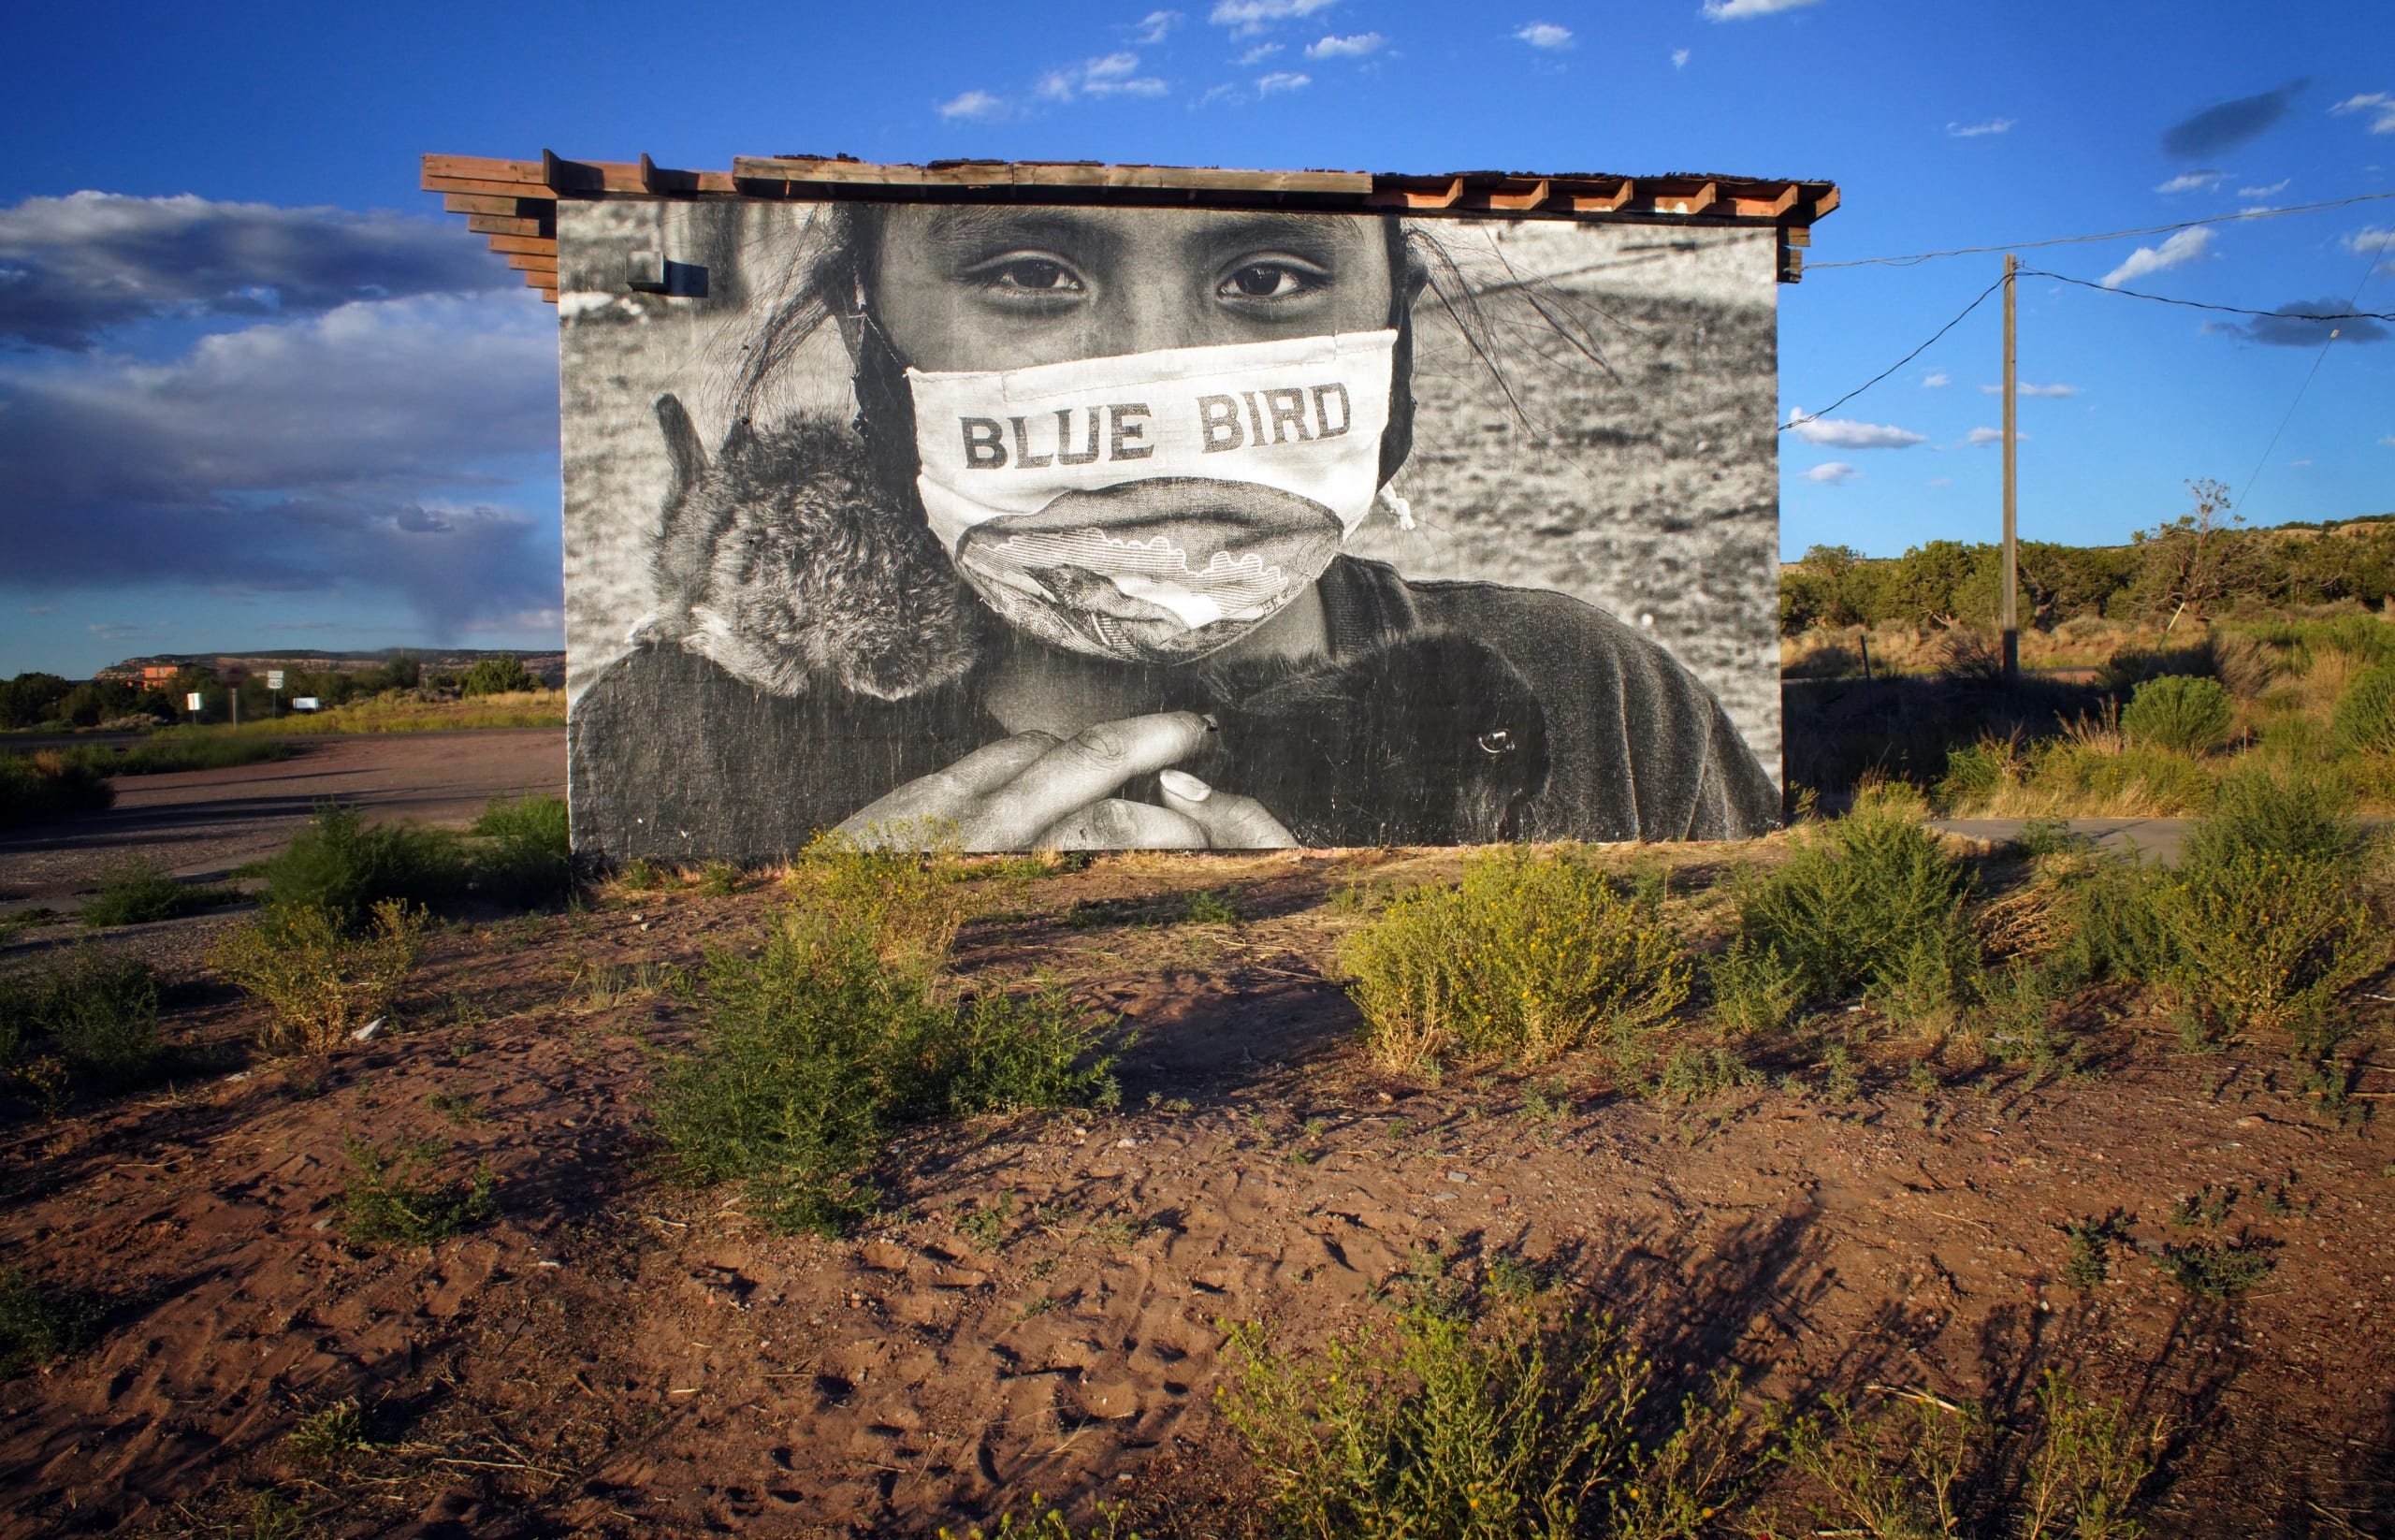 Color photograph shows a lush desert landscape with a bright blue sky. In the center of the image is a building wrapped in a photographic mural of a young girl, wearing a face mask and looking straight out at the veiwer, holding a small bunny